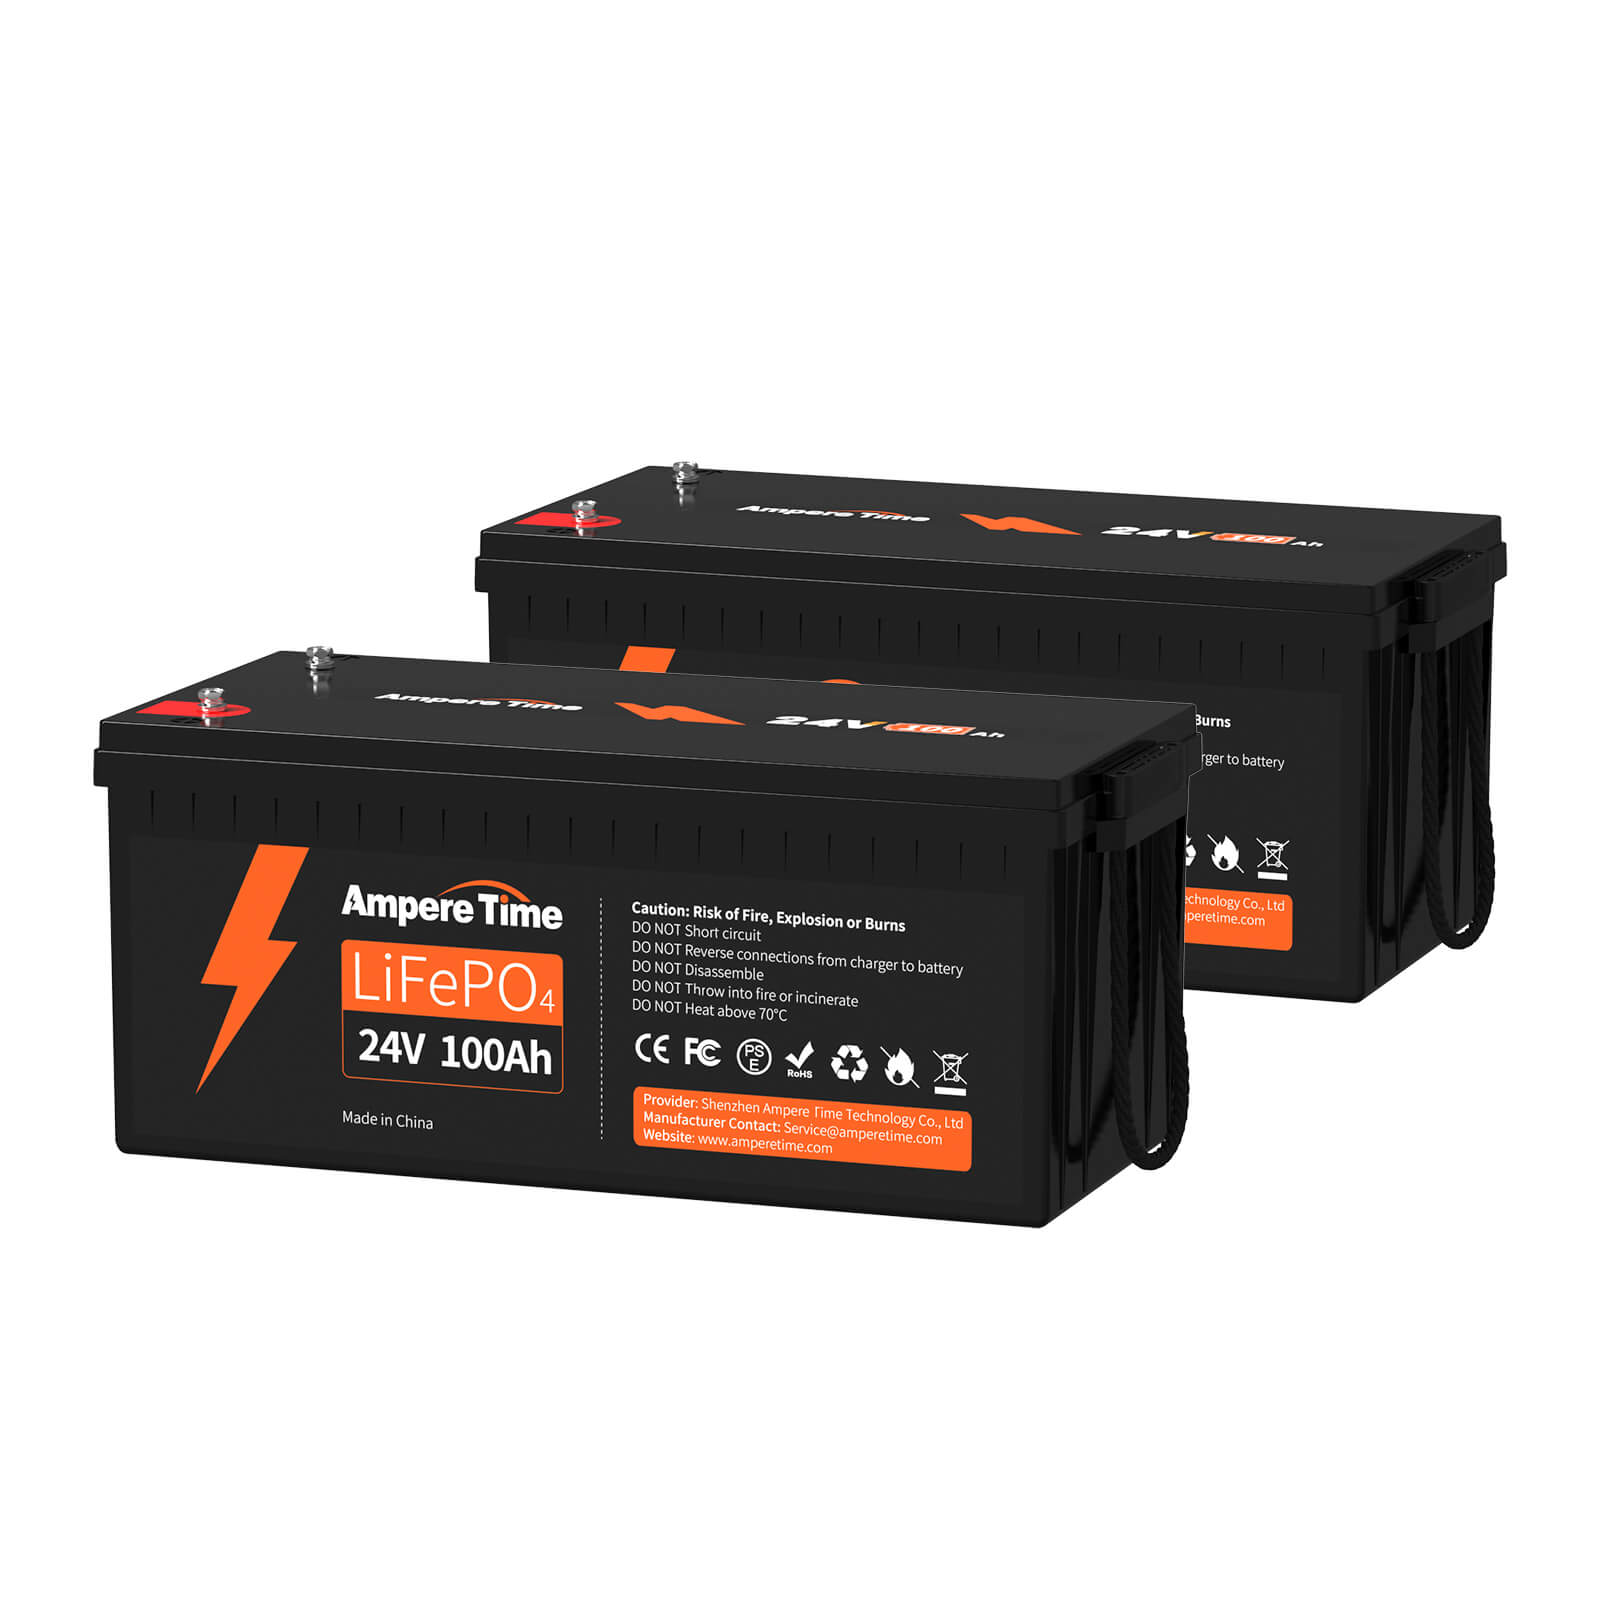 Ampere Time 24V 100Ah, 2560Wh Lithium LiFePO4 Battery & Built in 100A BMS